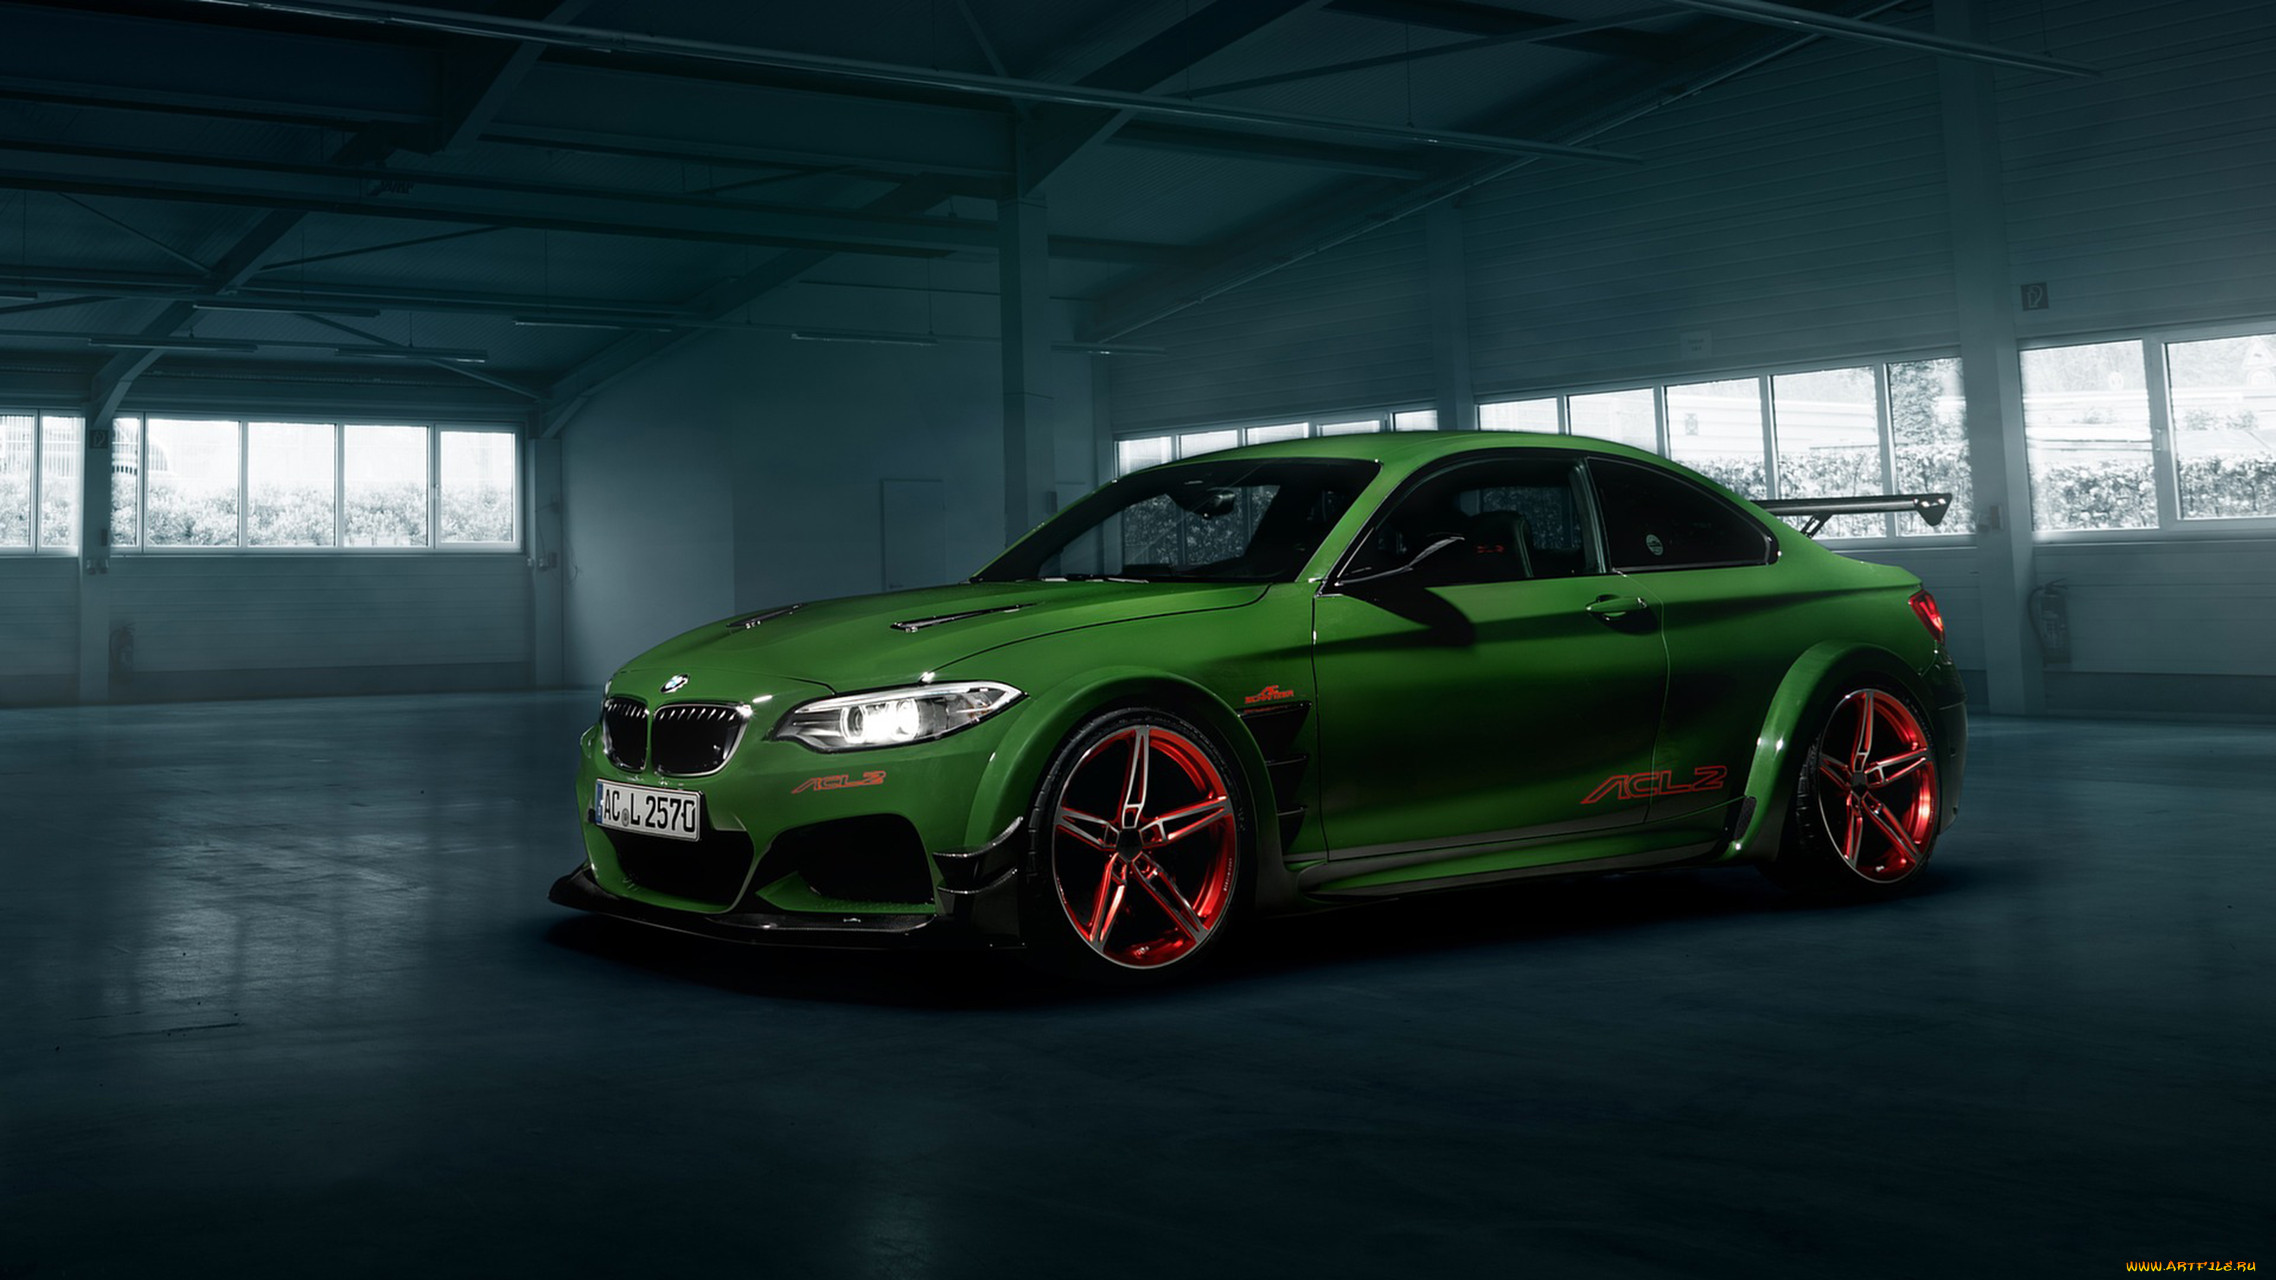 ac schnitzer acl2 concept based on the bmw m-235i coupe 2016, , bmw, 2016, coupe, concept, acl2, ac, schnitzer, m-235i, based